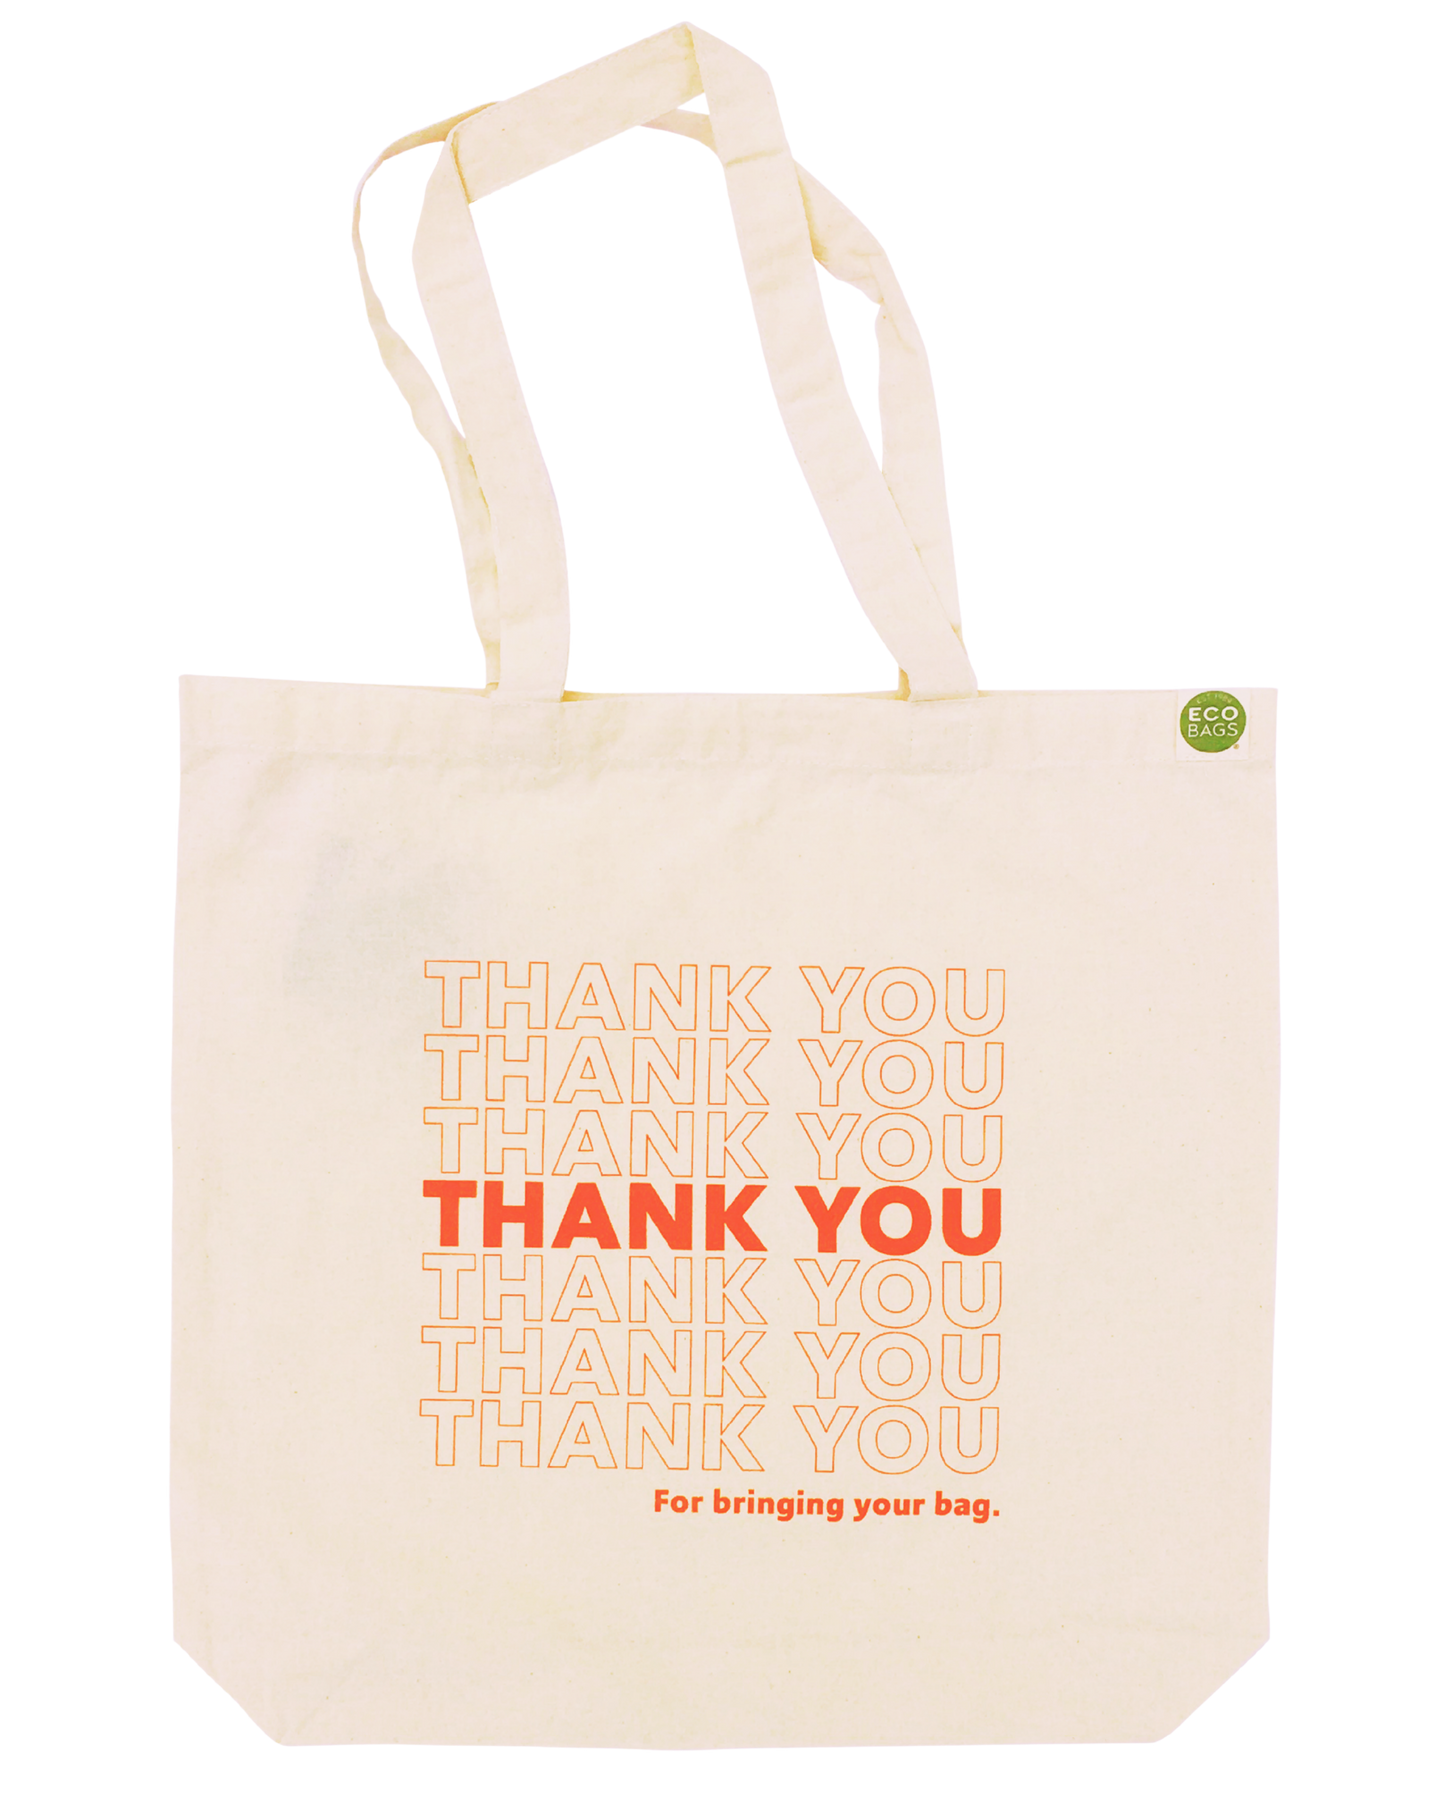 ECOBAGS "THANK YOU" PRINTED TOTE